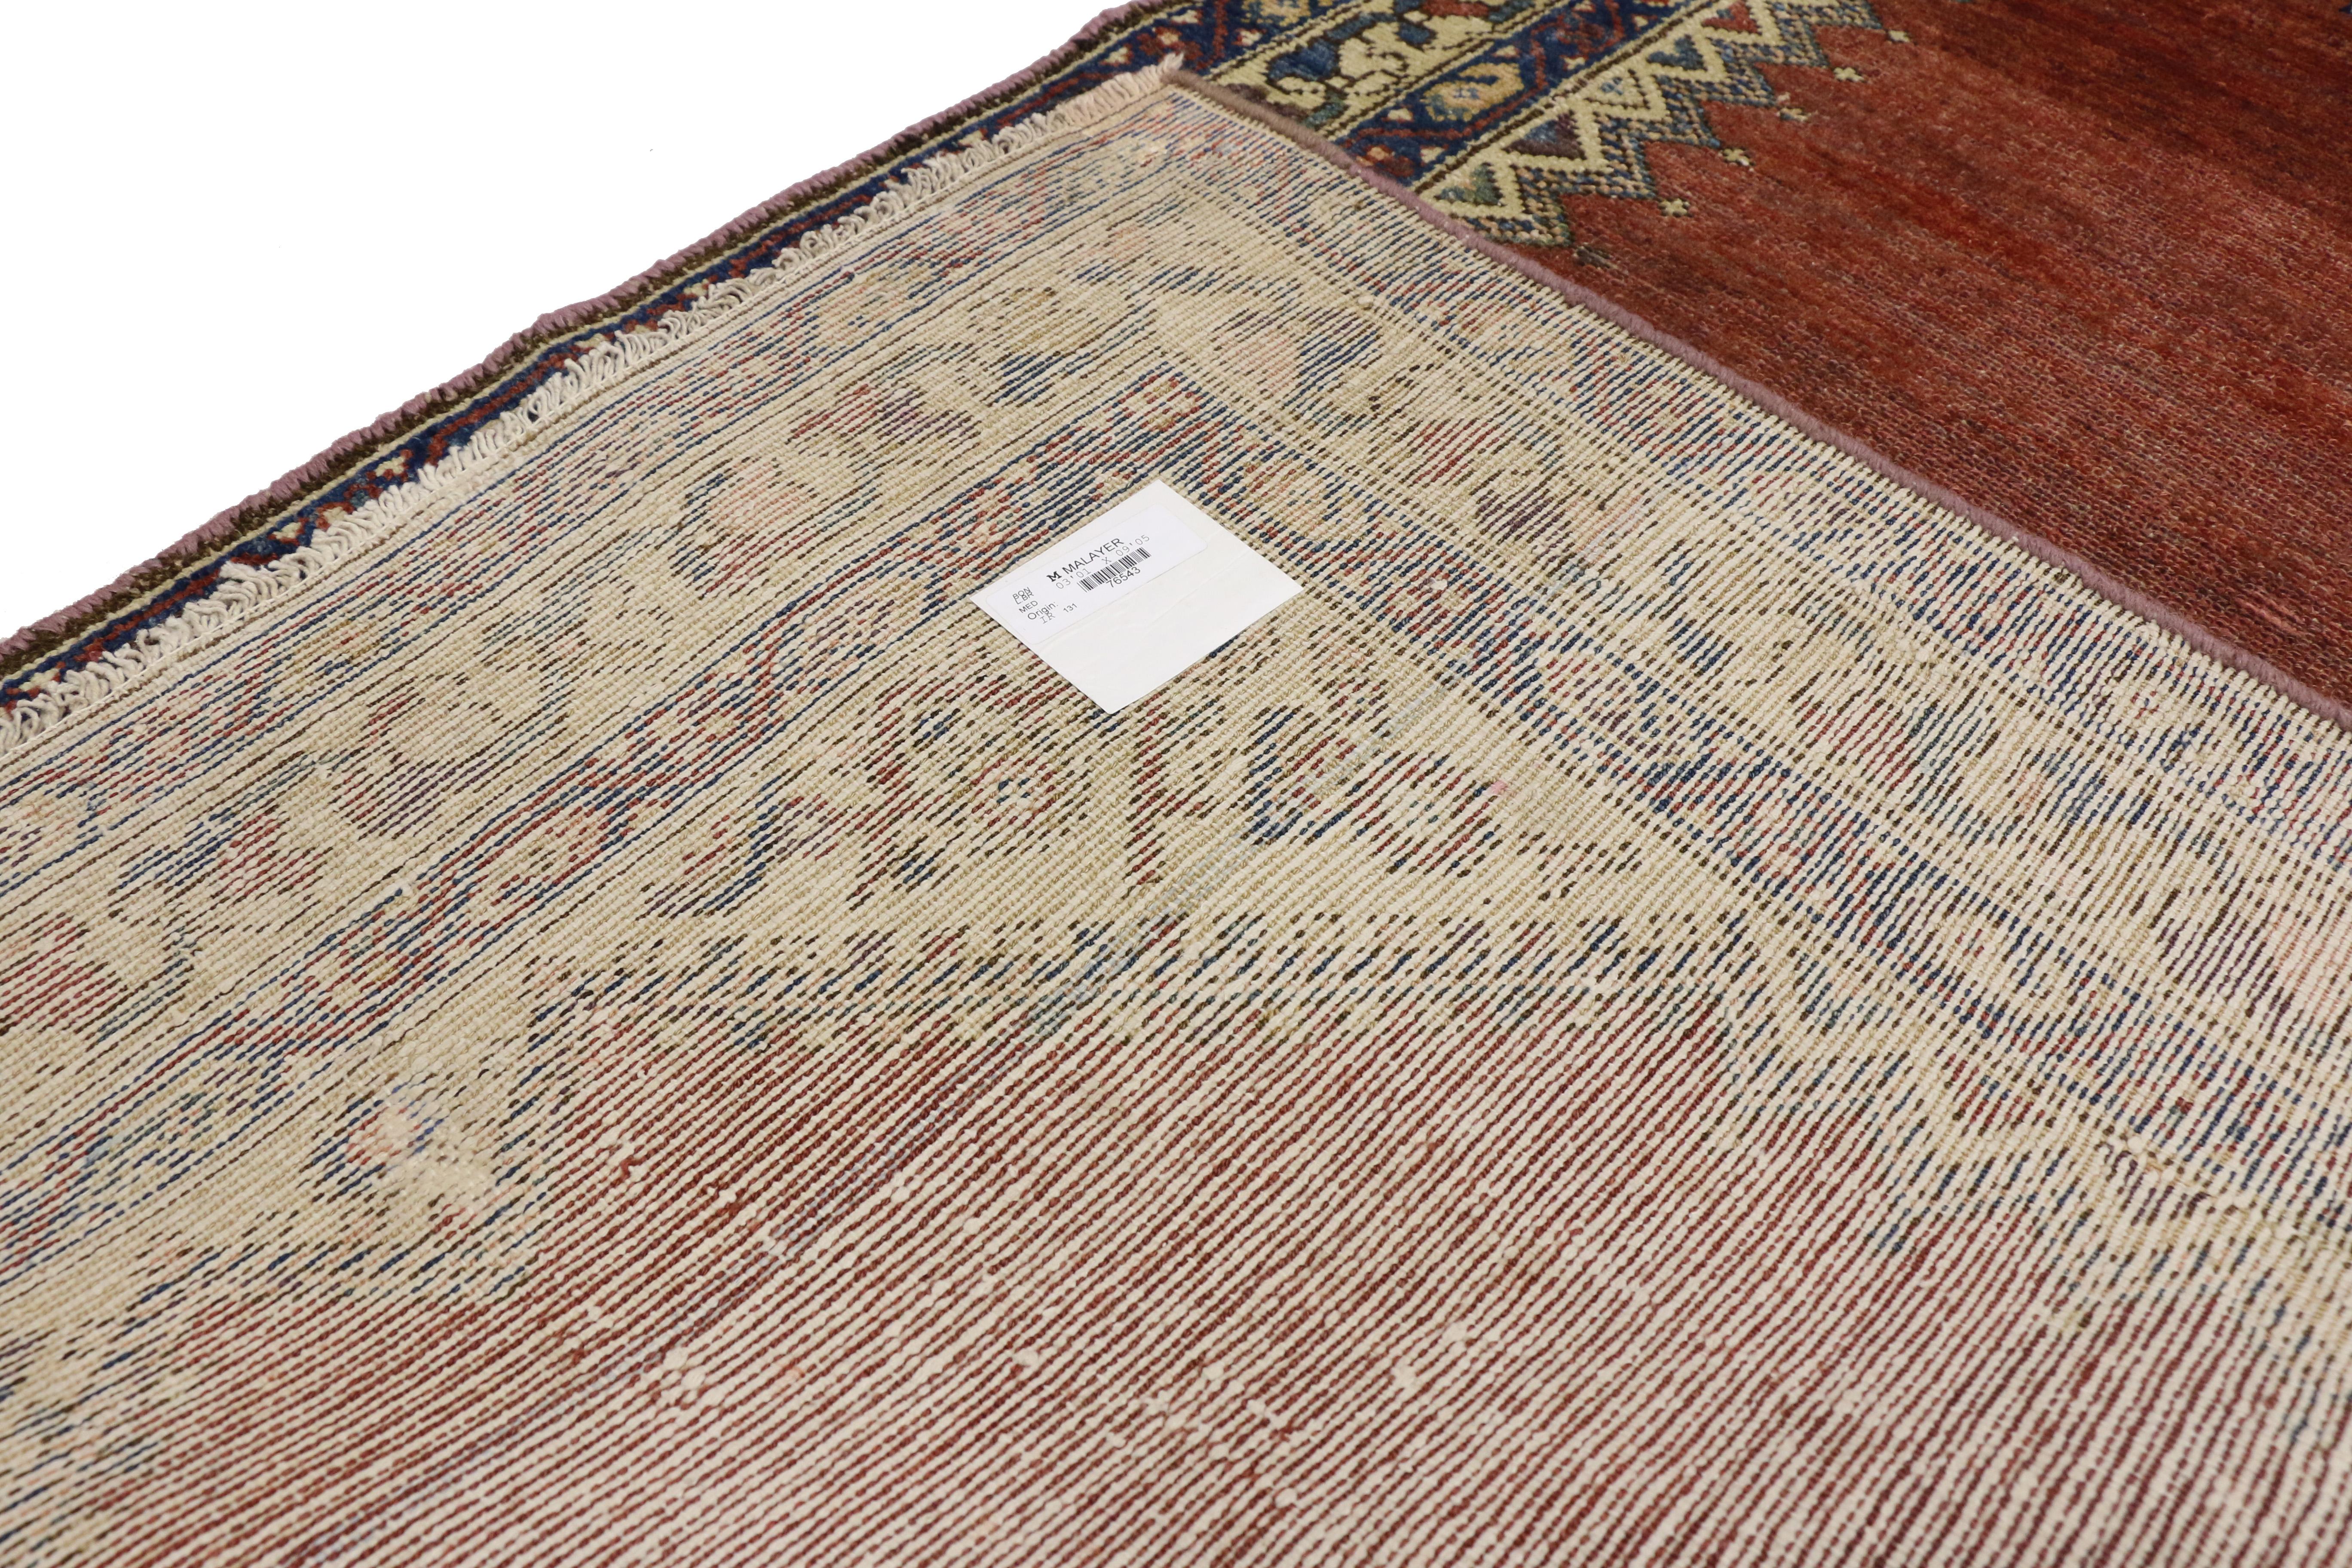 Antique Persian Malayer Runner, Hallway Runner In Good Condition For Sale In Dallas, TX